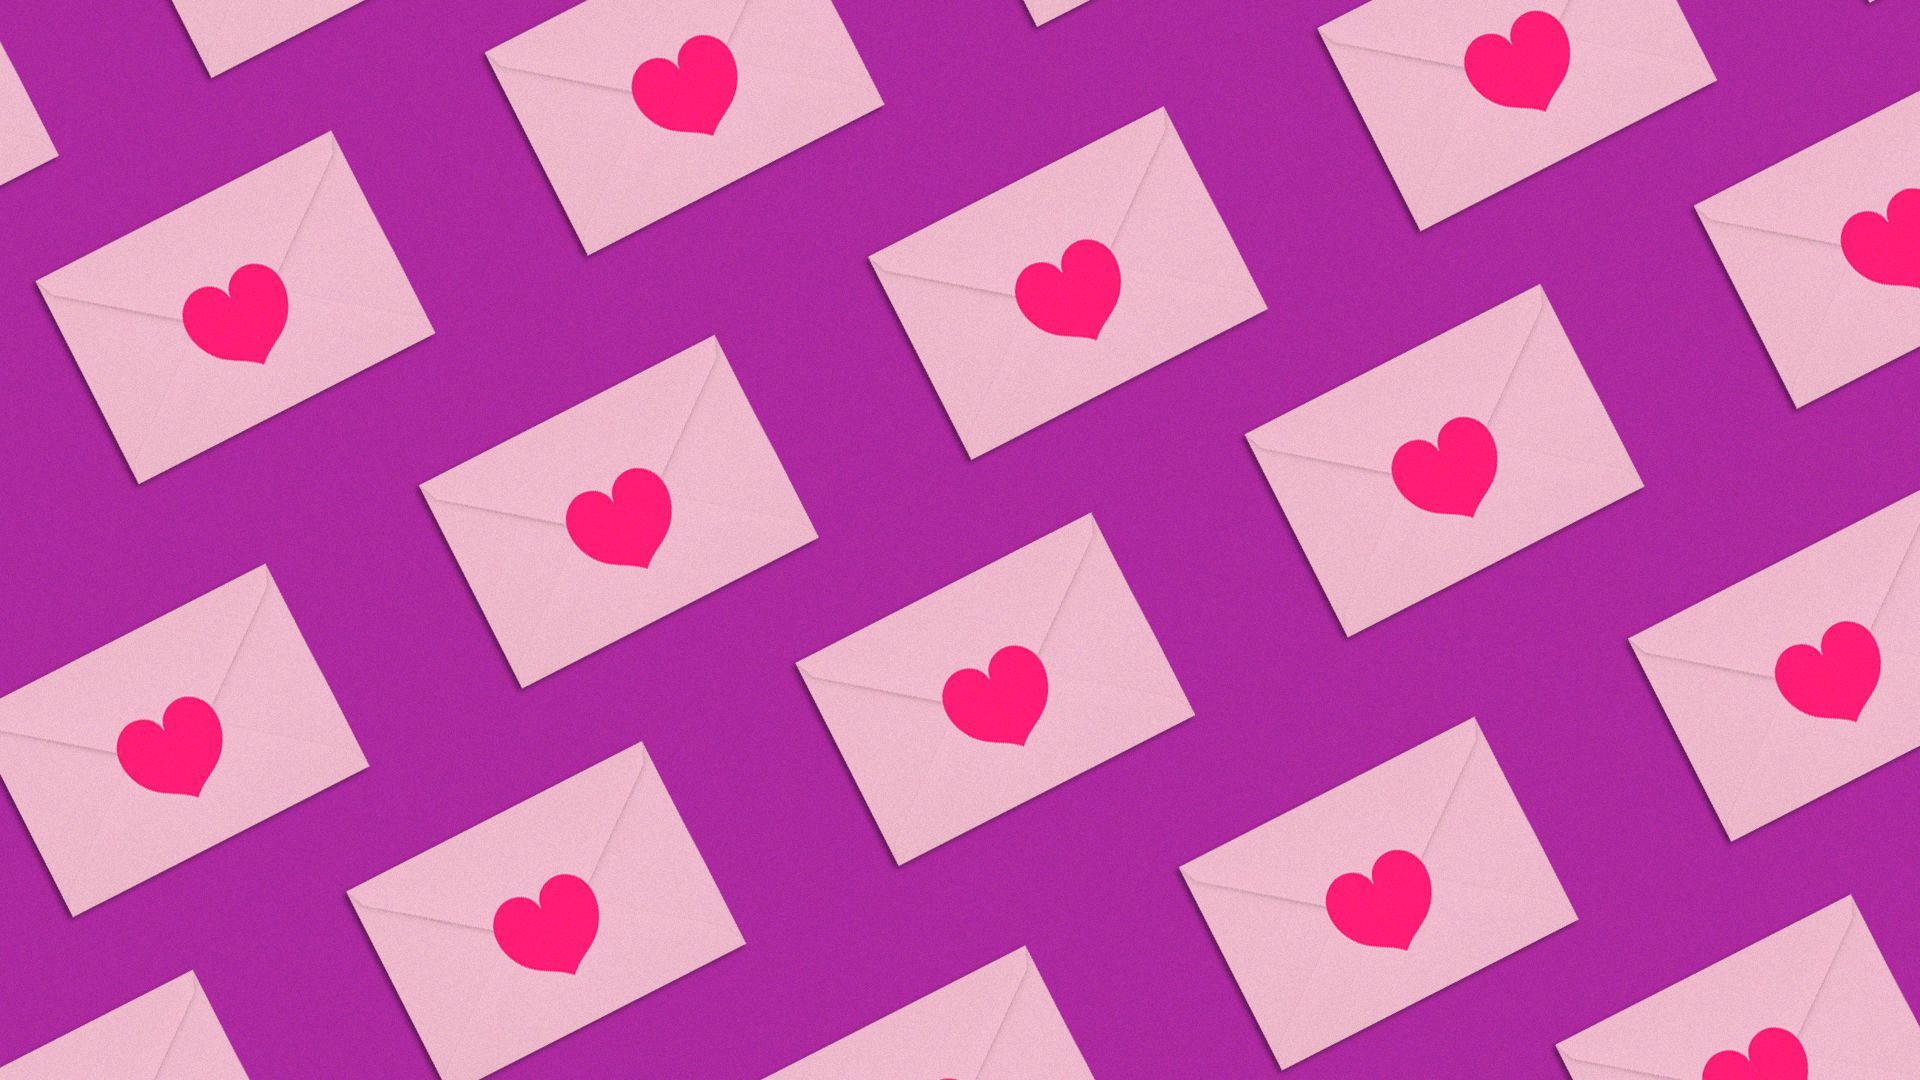 Illustration of a pattern of envelopes with hearts sealing them.